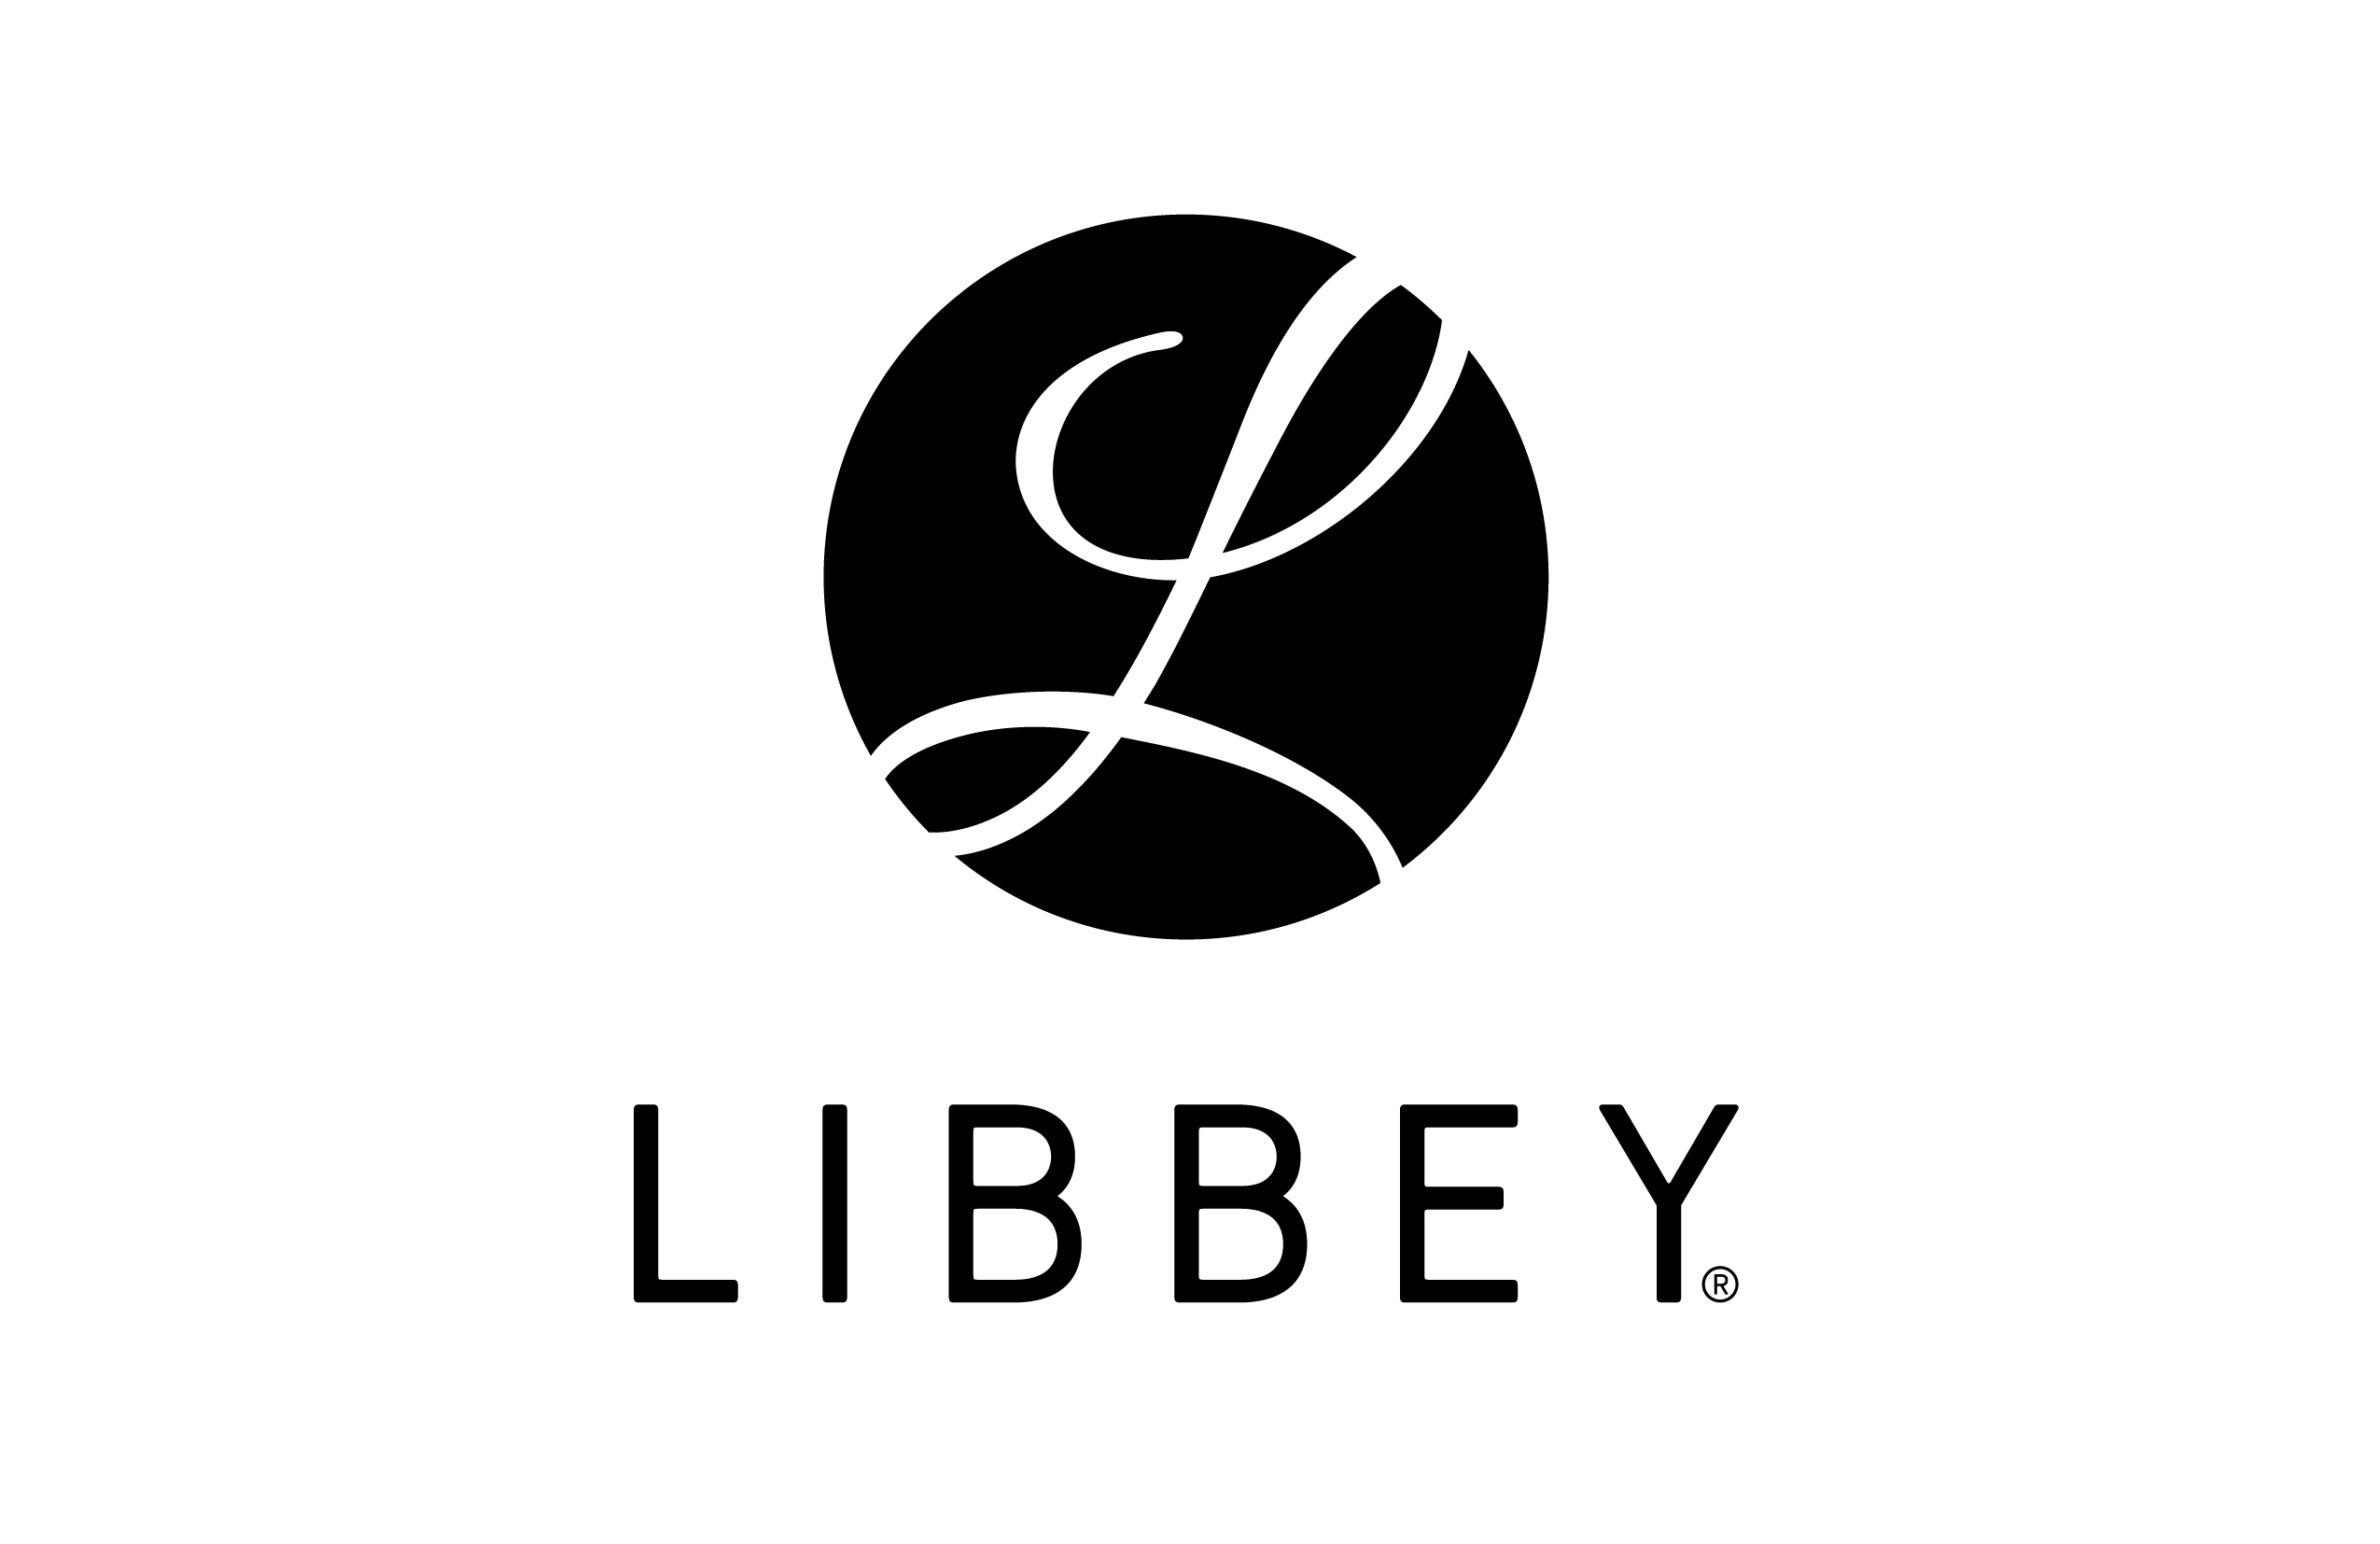 Libbey: Strategies for Driving Sales and Profit Growth Show Results